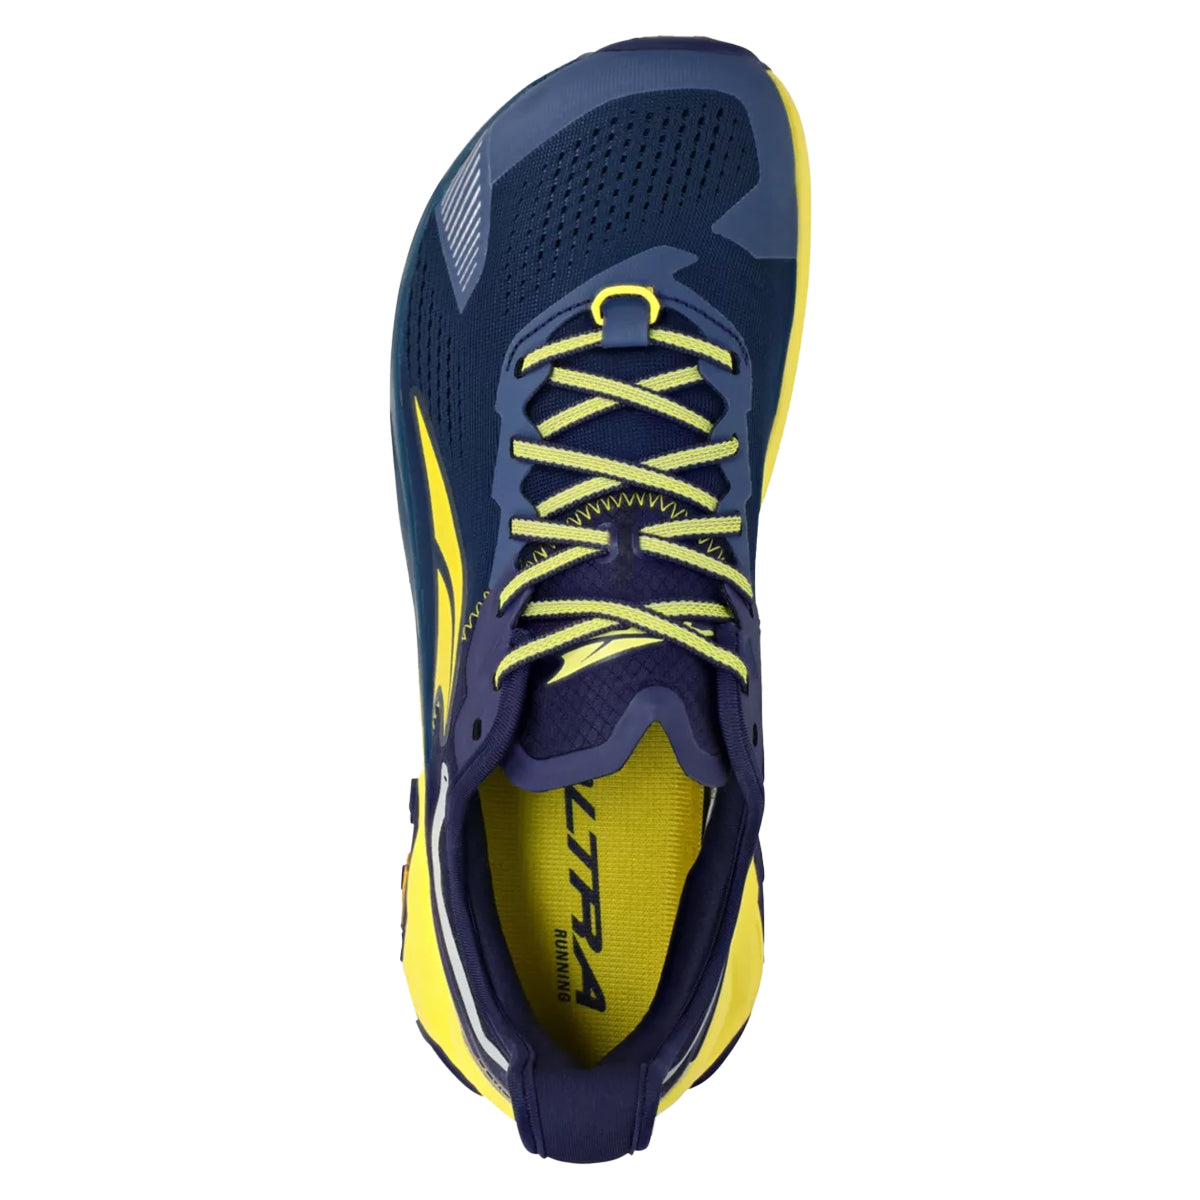 Altra Olympus 5 in Navy by GOHUNT | Altra - GOHUNT Shop